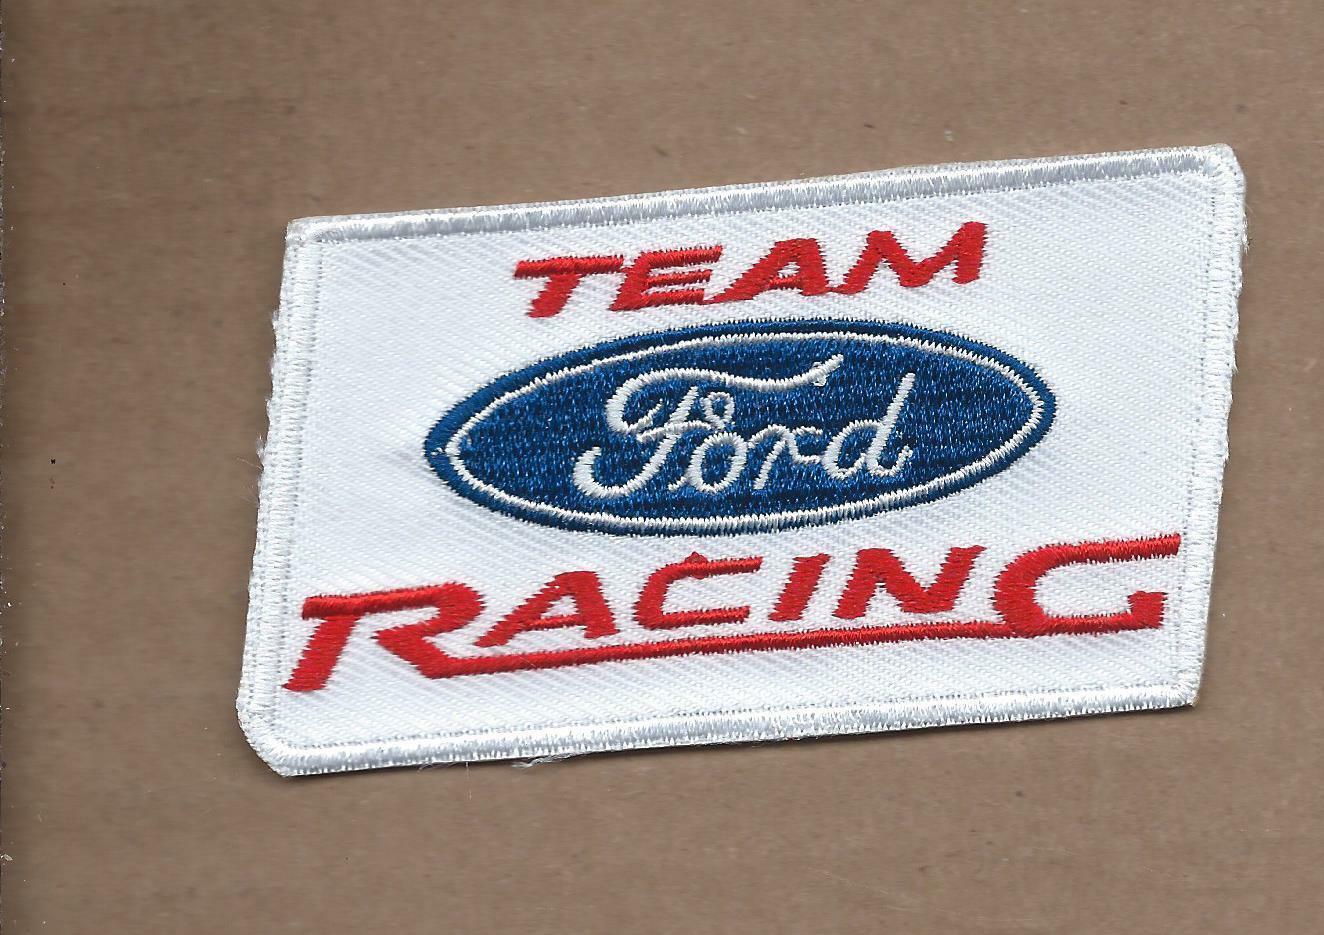 NEW 1 7/8 X 3 3/8 INCH FORD RACING TEAM IRON ON PATCH 